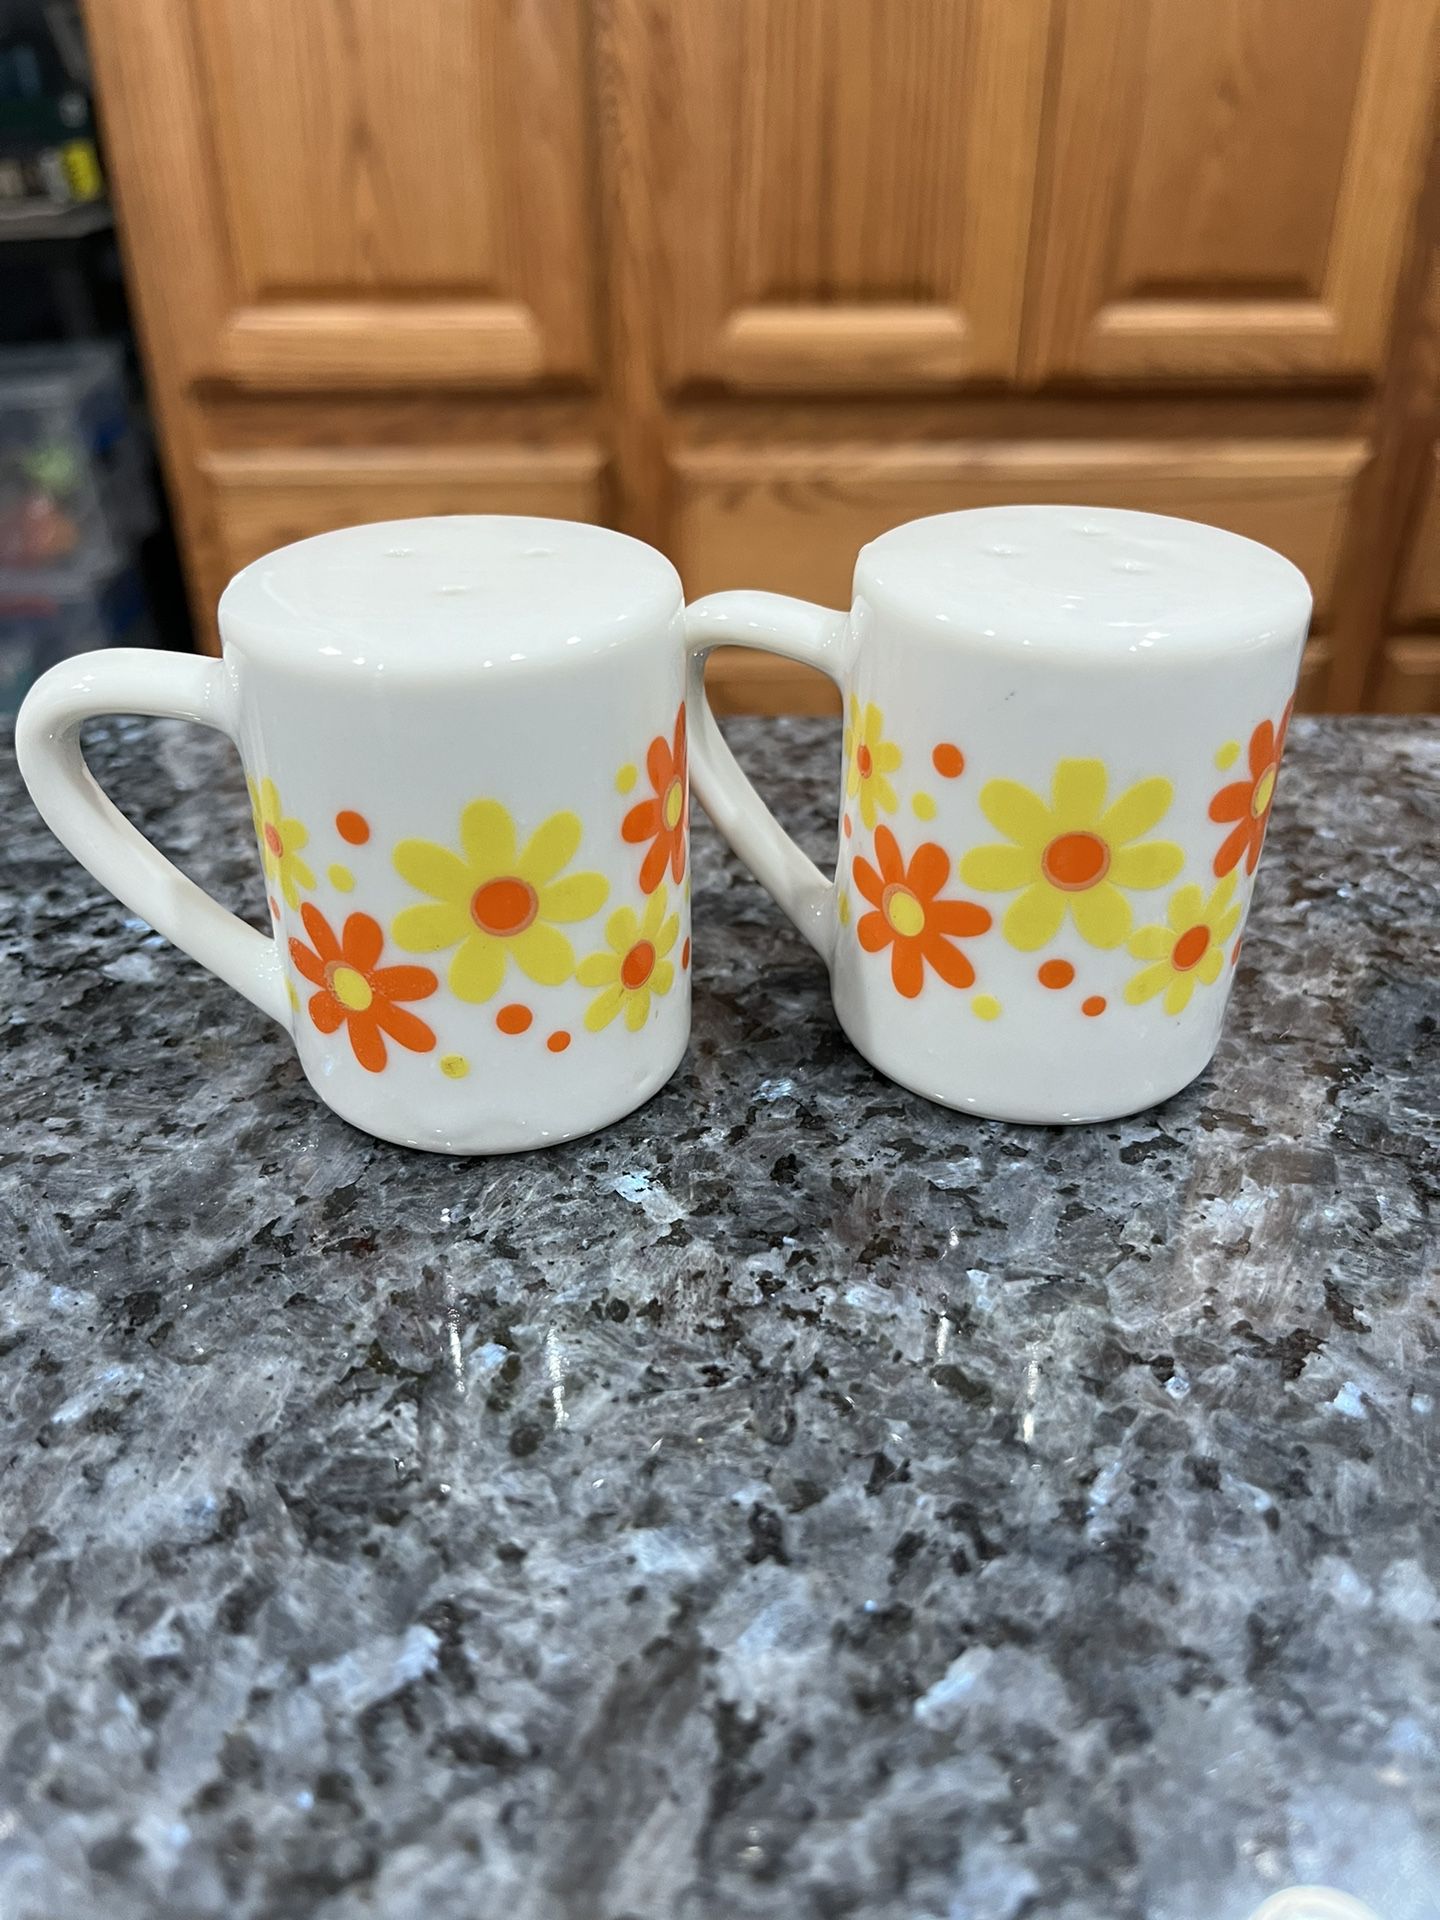 Vintage Japan Takahashi Salt and Pepper Shakers Orange & Yellow Flower Daisy.  Preowned Never Used 